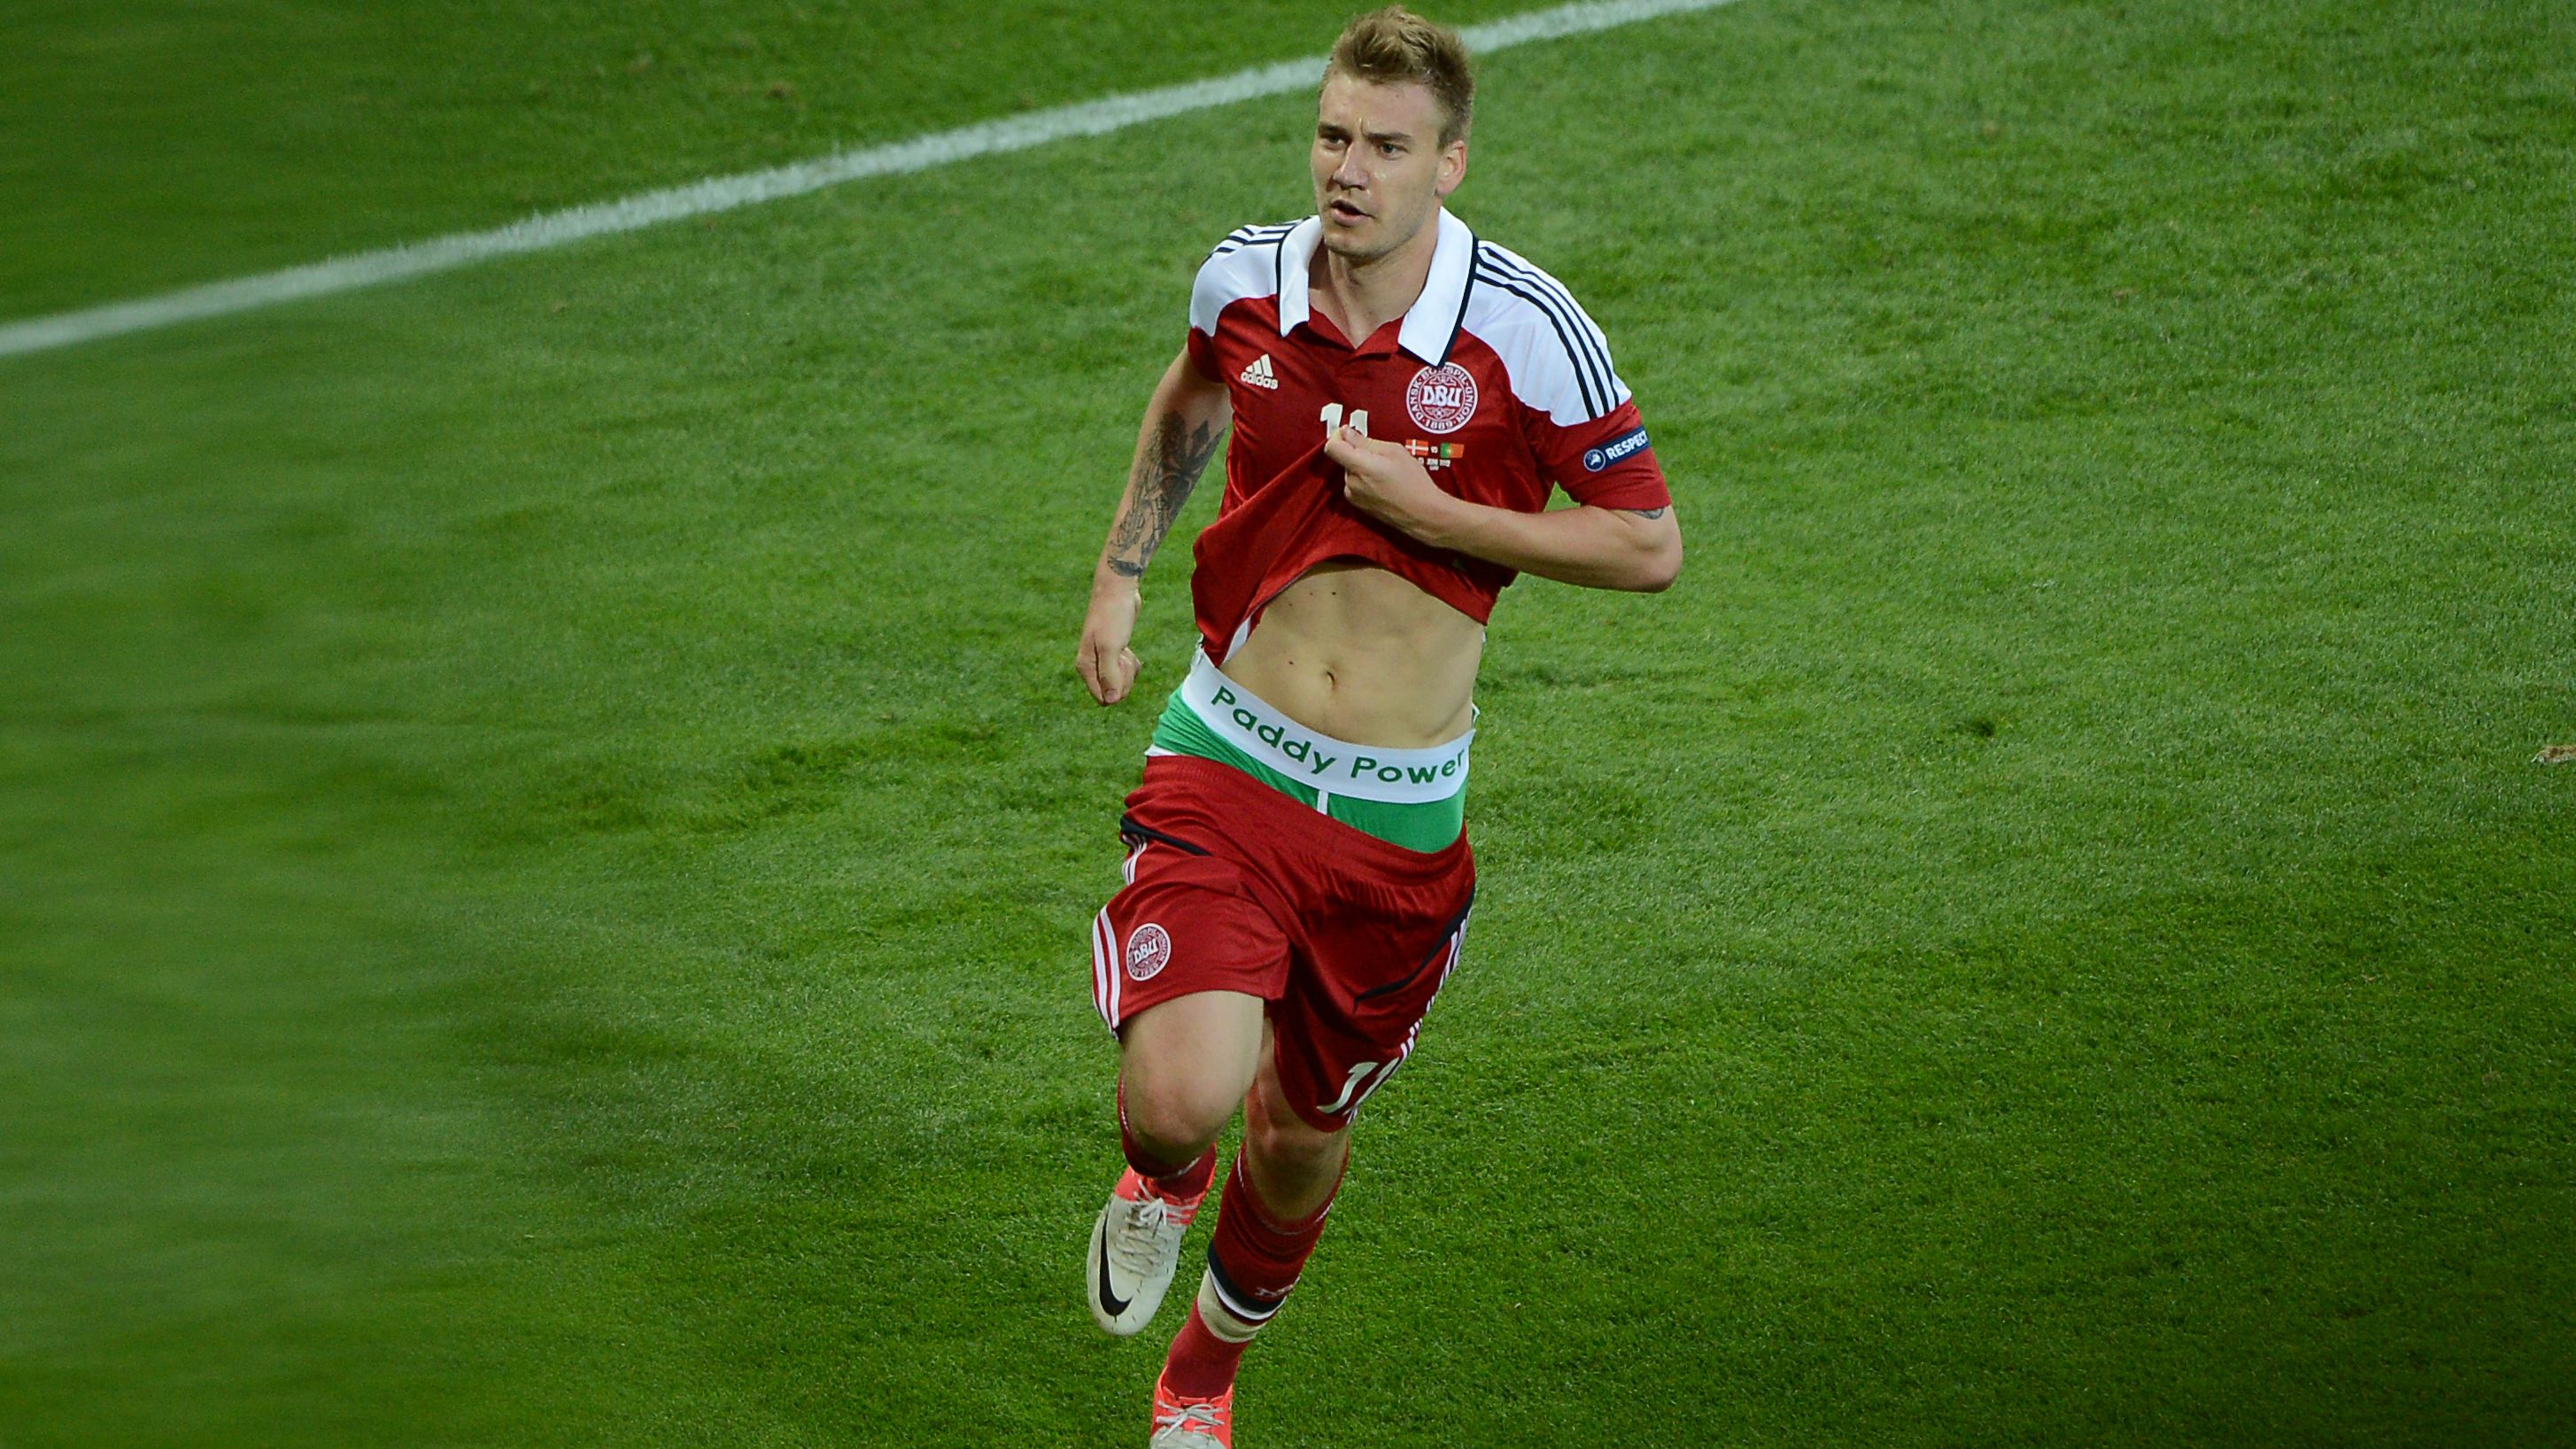 Denmark's Nicklas Bendtner scored twice during his country's 3-2 defeat against Portugal.